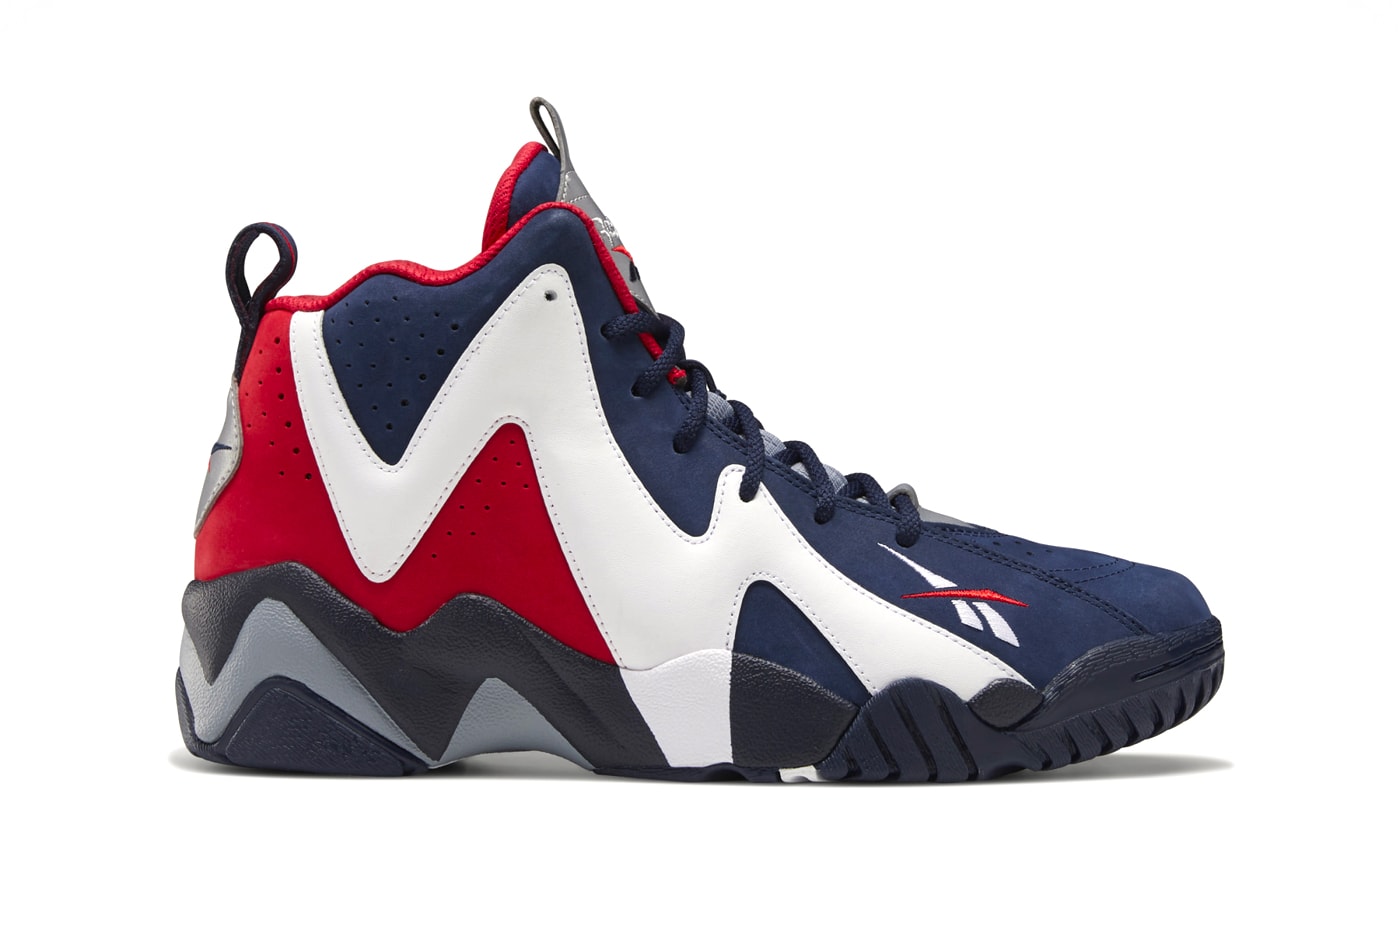 Why Shawn Kemp did not accept Reebok's first Kamikaze shoe design